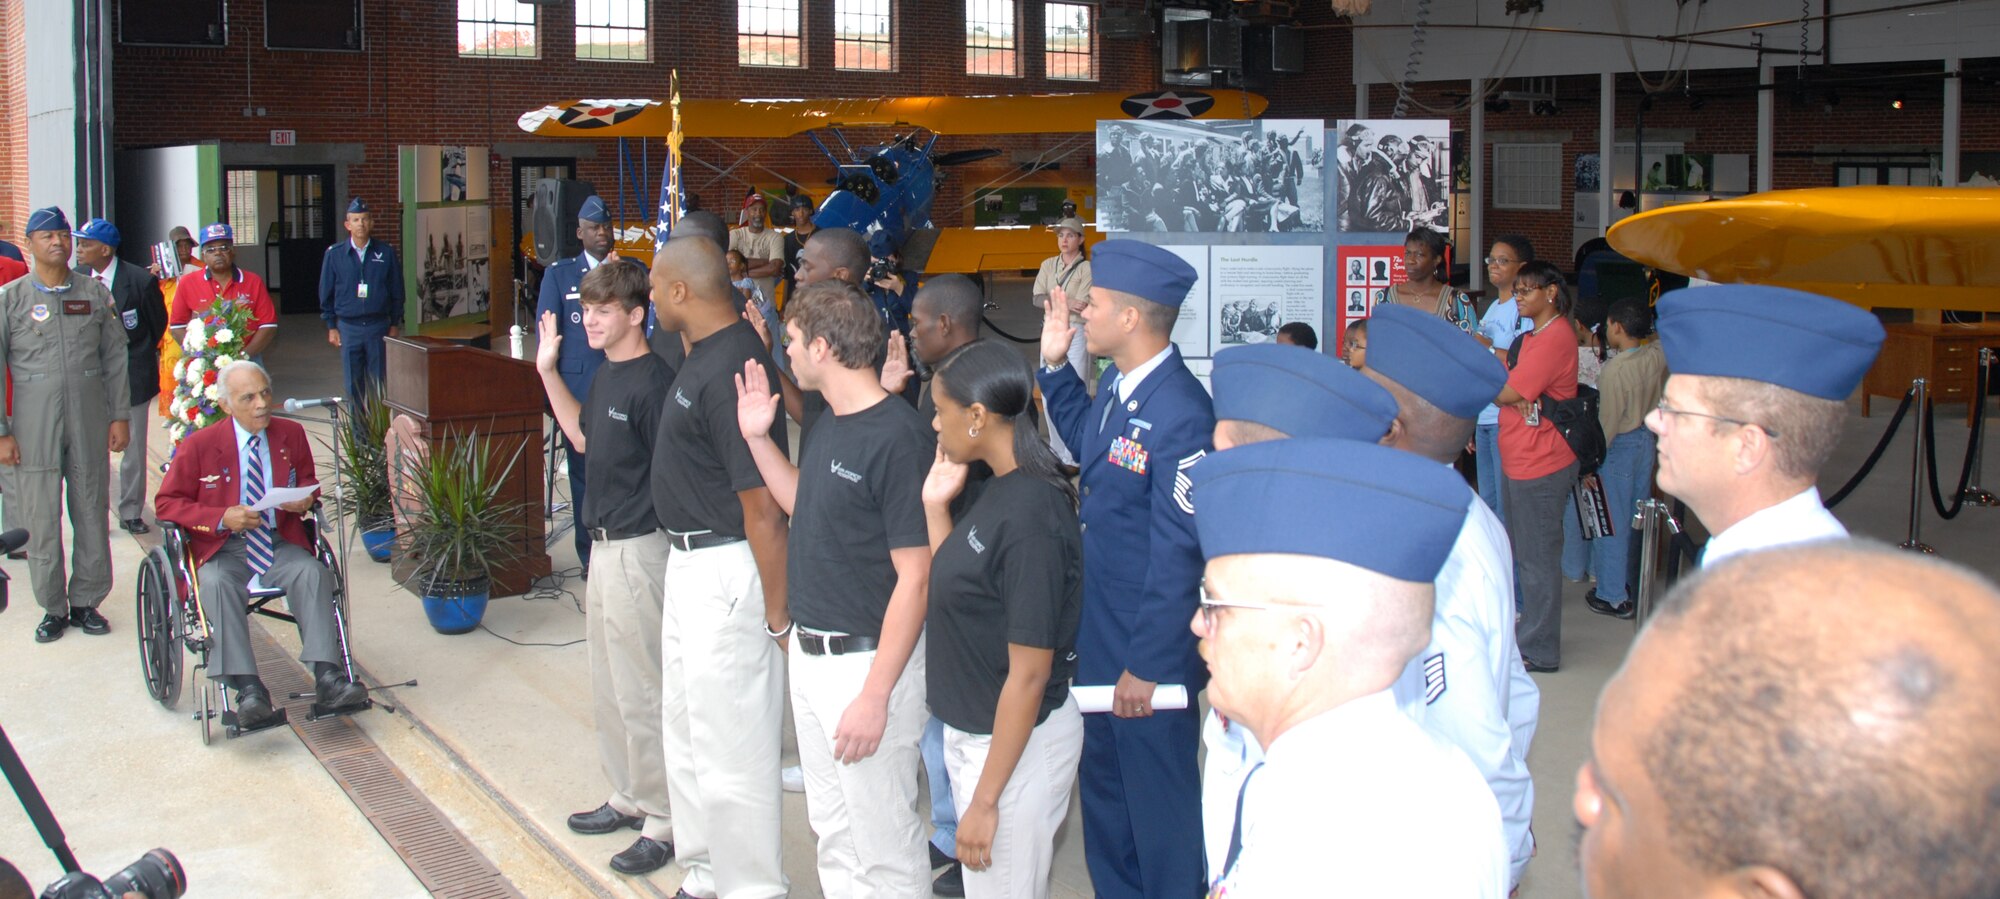 Retired Lt. Col. Herbert E. Carter administers the oath of enlistment to 11 908th Airlift Wing people who either enlisted or re-enlisted Oct. 11 at Moton Field in Tuskegee, Ala. Colonel Carter, an original Tuskegee Airman, is a former commander of the AFROTC detachment at Tuskegee, longtime university official as well as president of the Tuskegee chapter of Tuskegee Airmen Inc. He was on hand for the three-day grand opening of the Tuskegee Airmen National Historic Site. (U.S. Air Force Photo by Lt. Col. Jerry Lobb)         